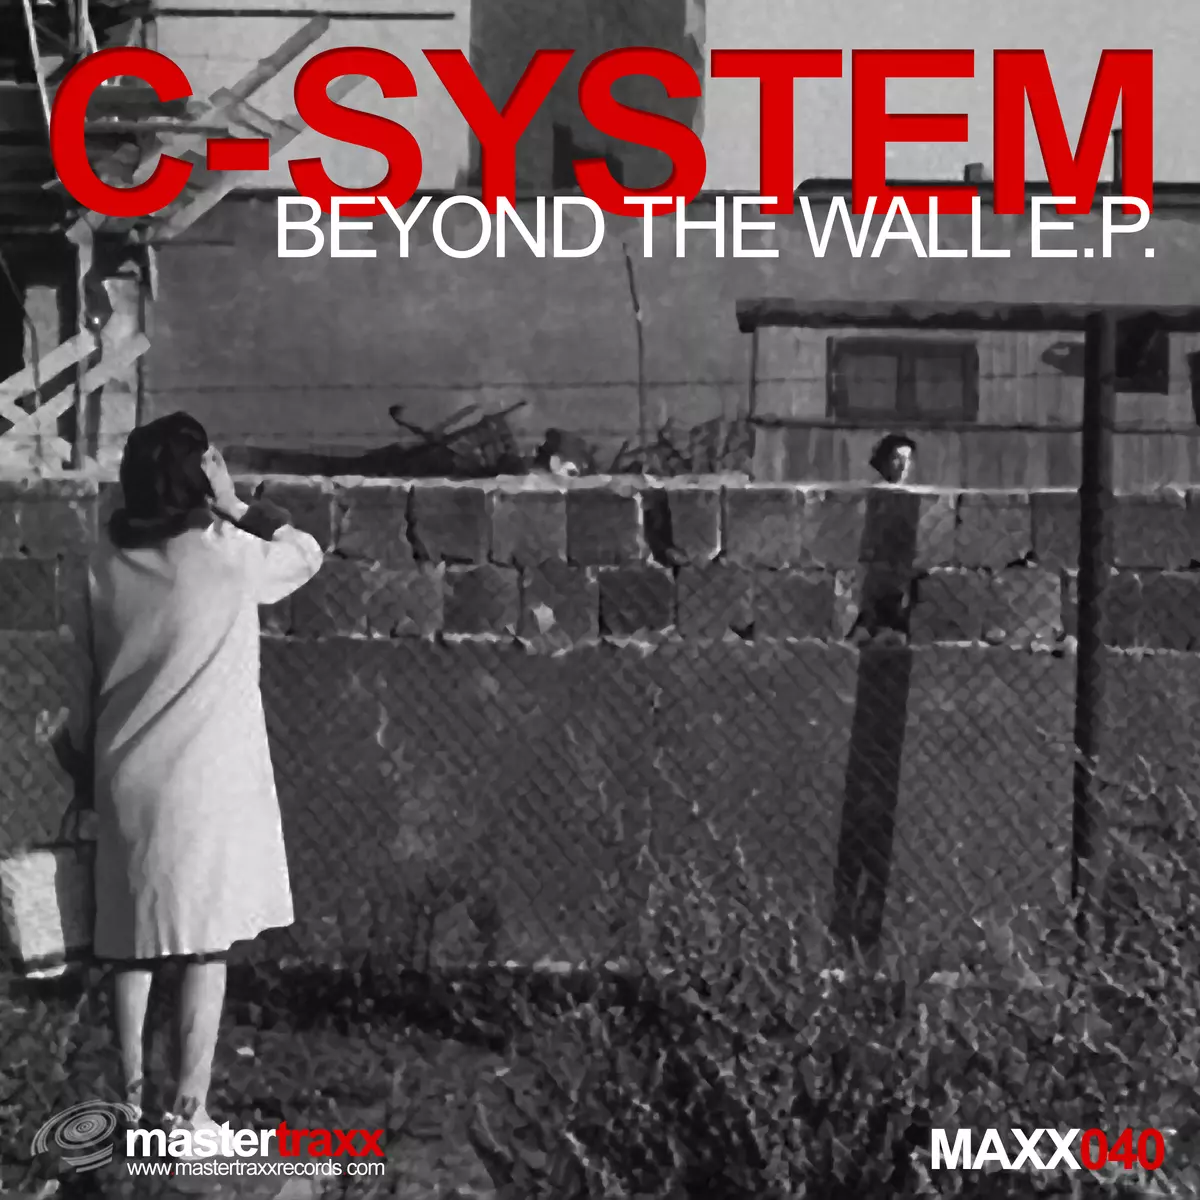 image cover: C System - Beyond The Wall E.P